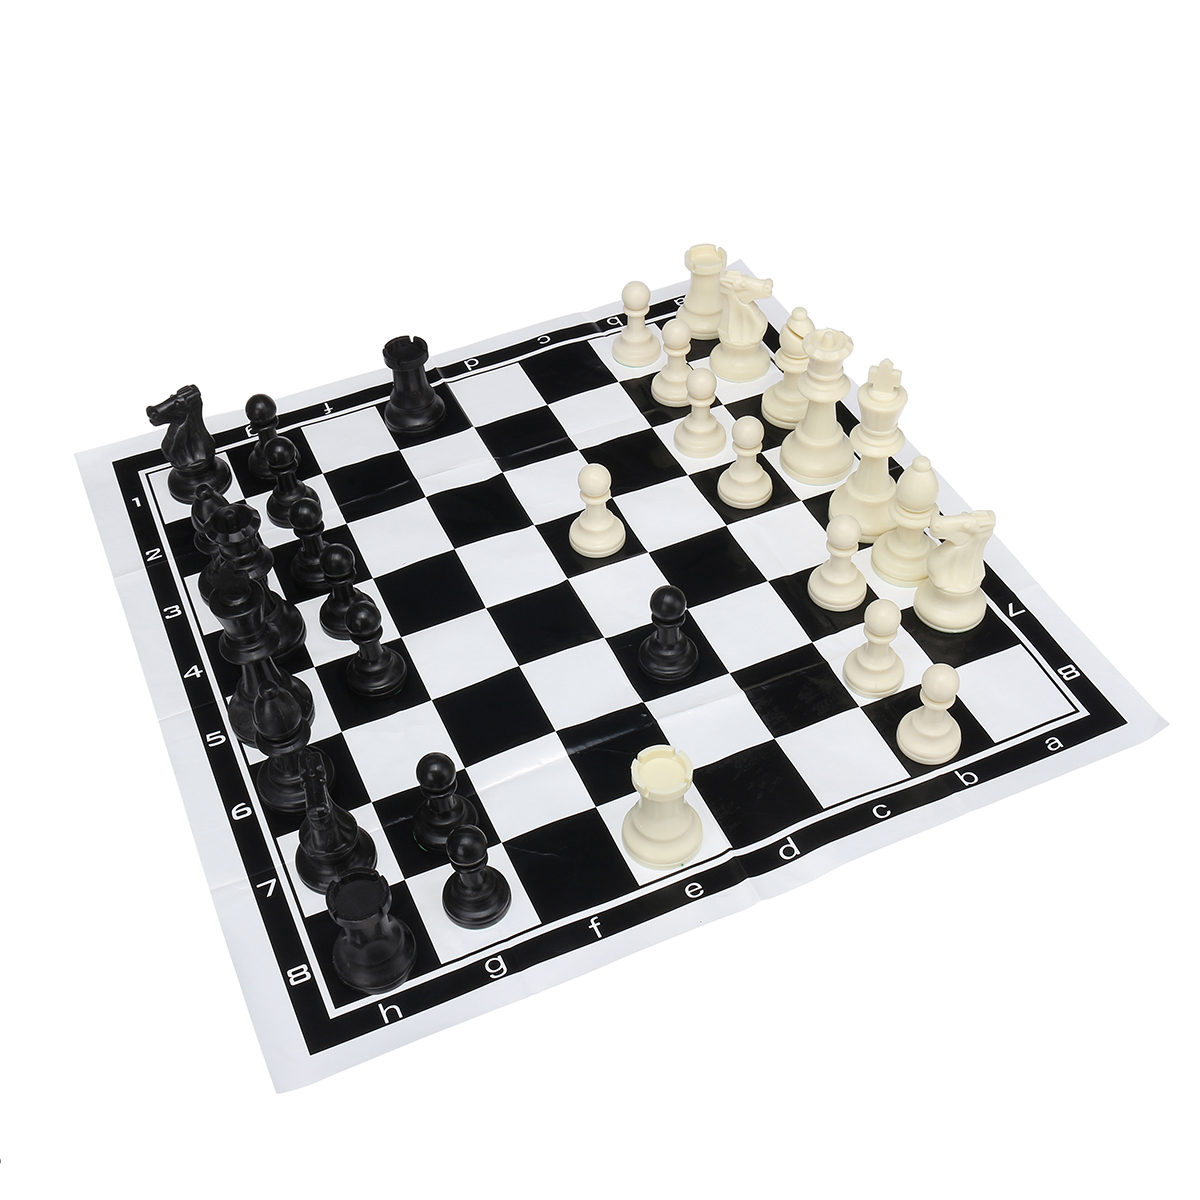 32-Piece-Game-Chess-Foldable-957564cm-King-Knight-Set-Outdoor-Recreation-Family-Camping-Game-1638530-1